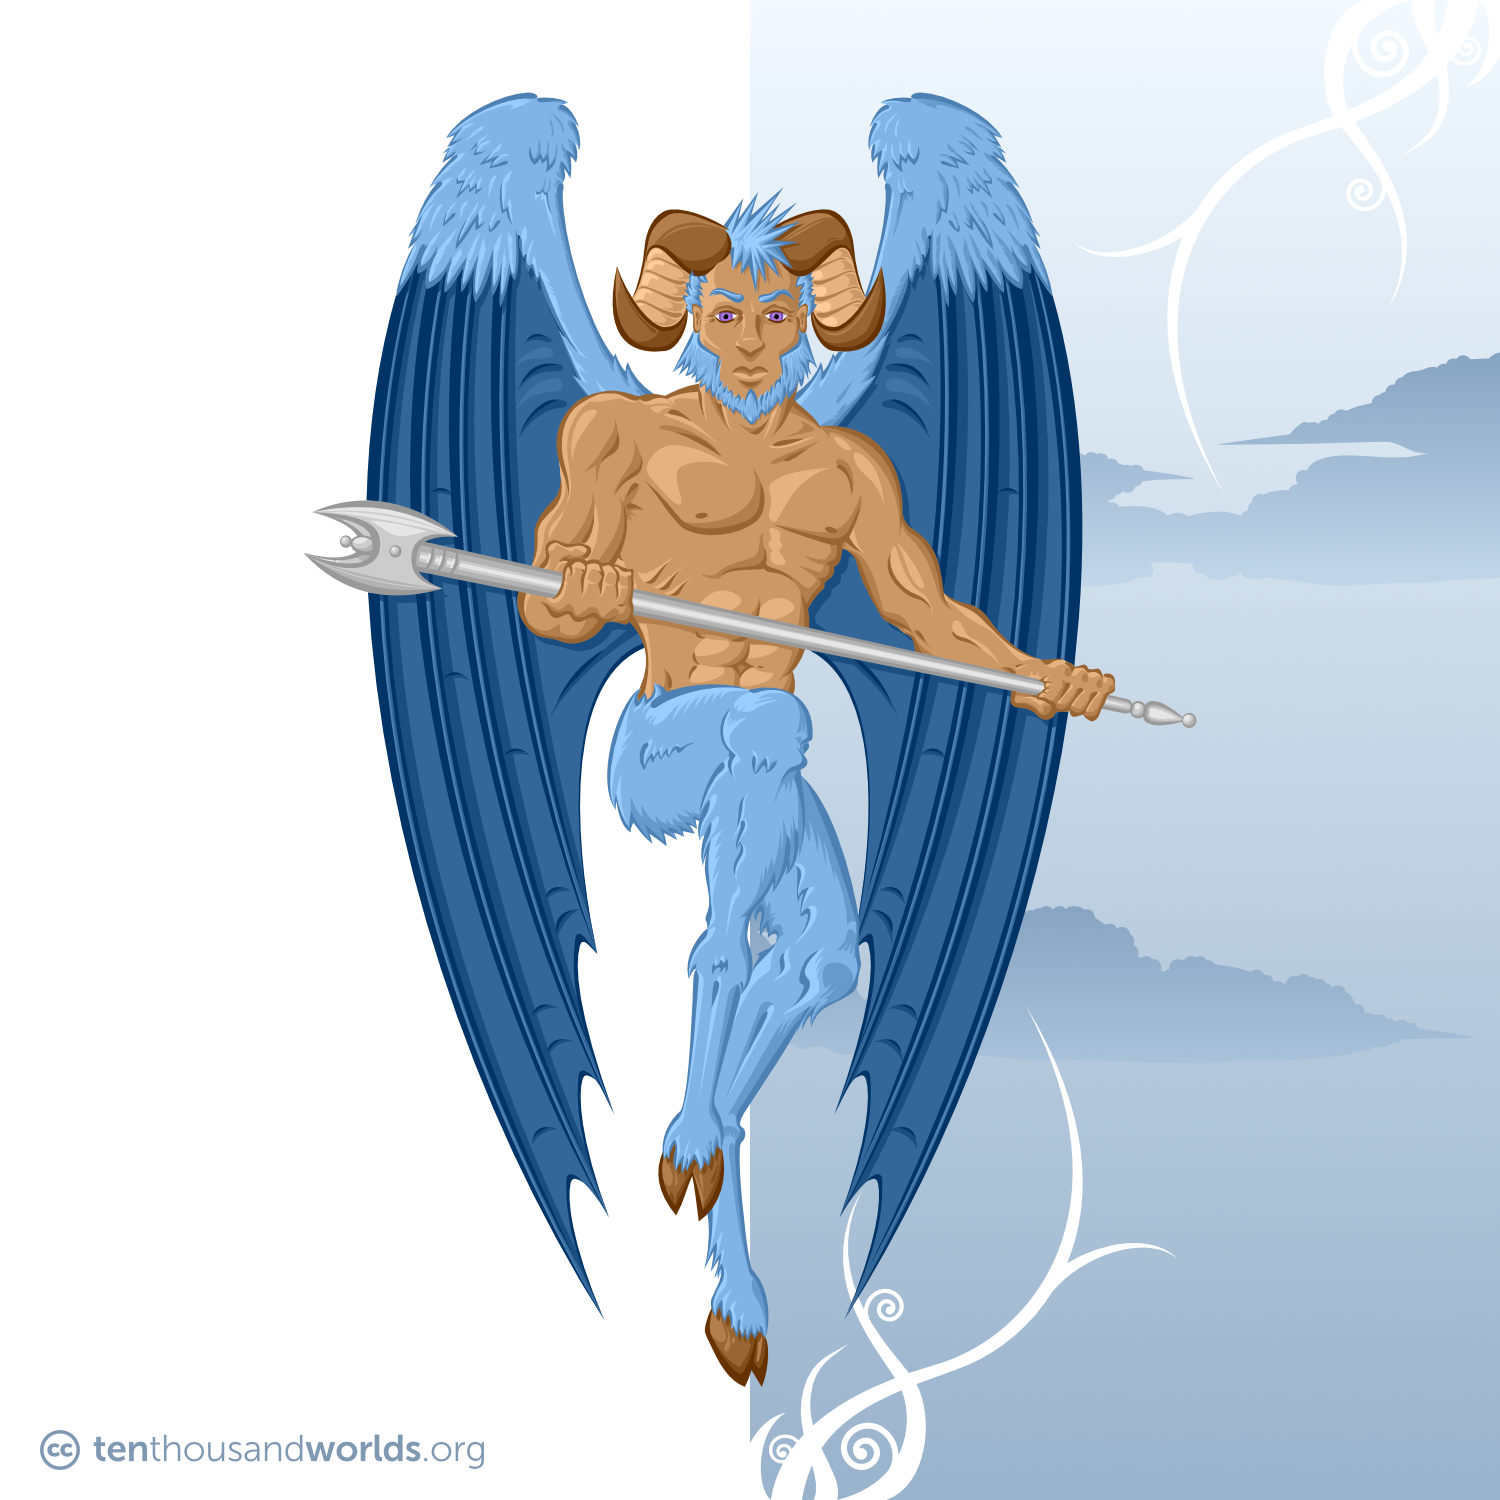 A creature with the brown upper body and head of a blue-haired man, ram’s horns, the blue-furred legs of a goat, and bat-like wings edged in blue feathers. He grips an elaborate silver staff.